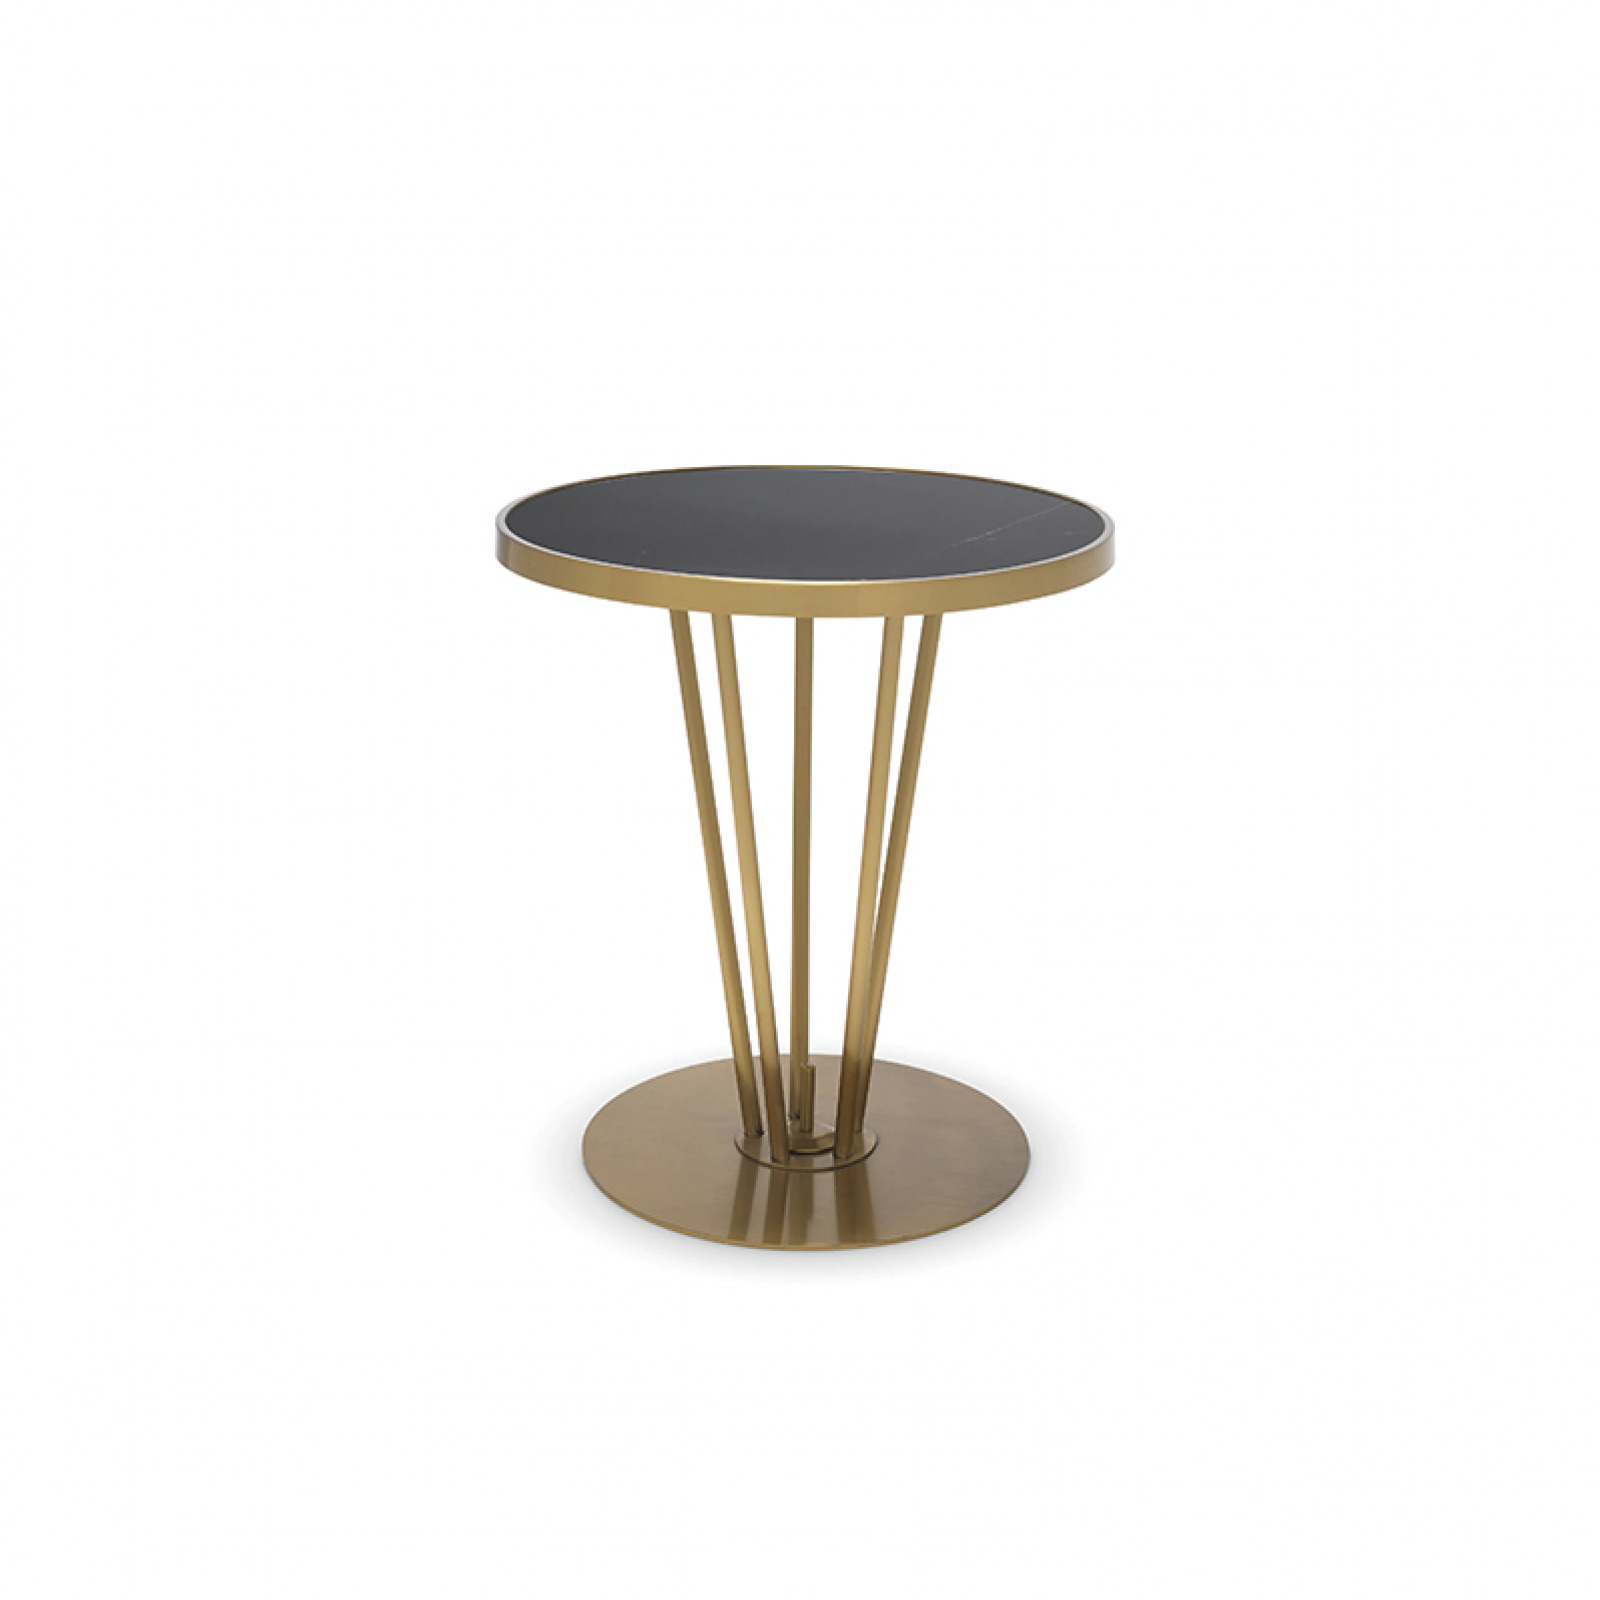 Horatio side table